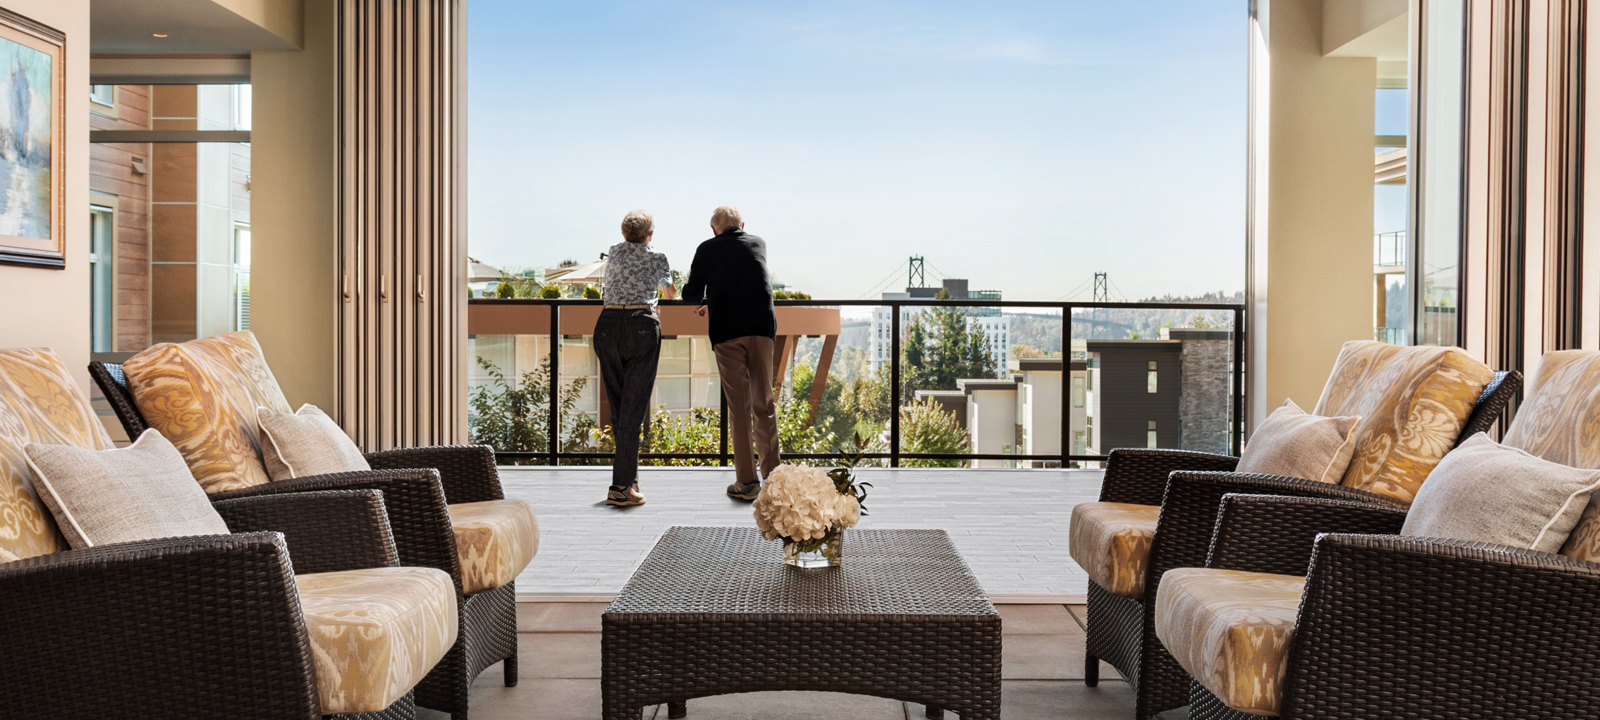 Shot of a senior couple in the balcony of Amica Lions Gate enjoying the view.